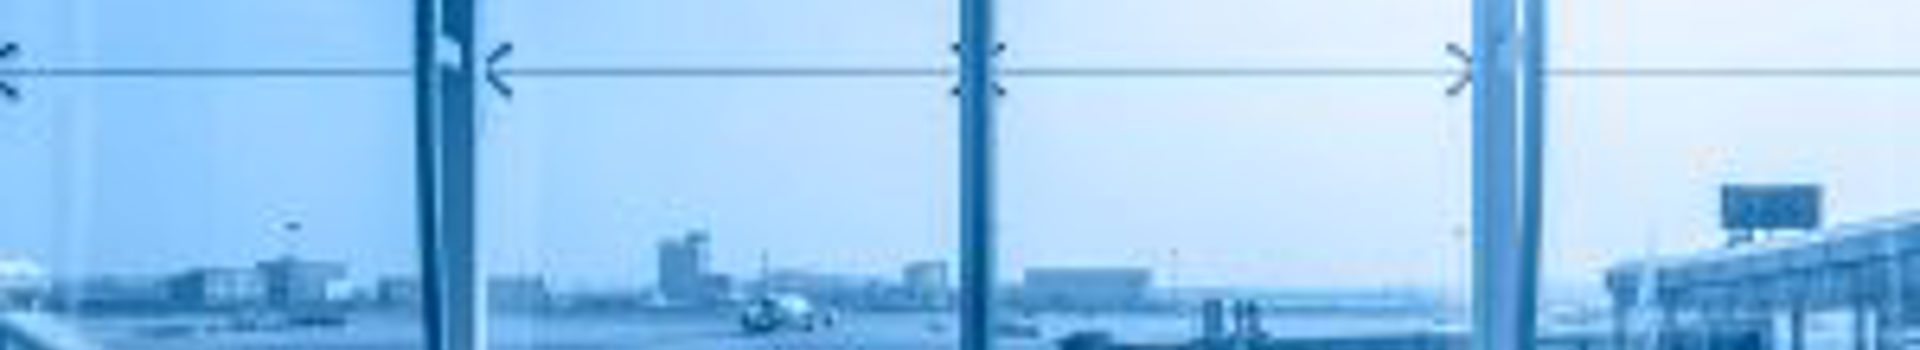 Photo of an airport window with an airplane taking off in the backgrond